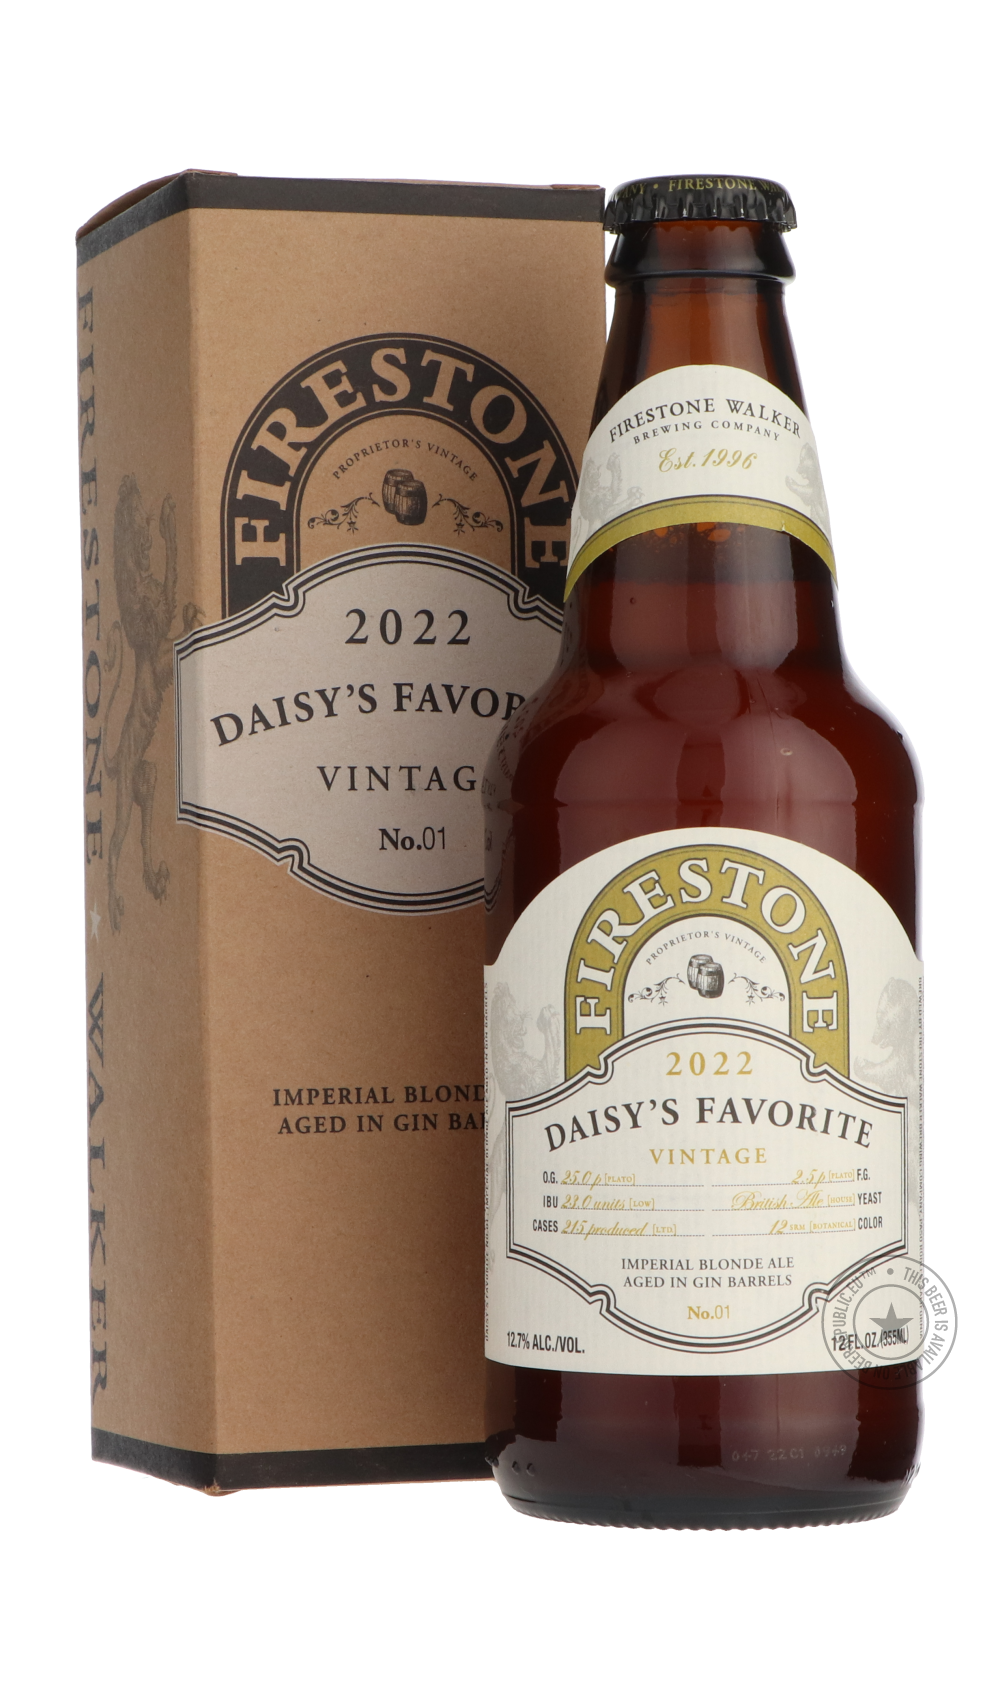 -Firestone Walker- Daisy's Favorite 2022-Pale- Only @ Beer Republic - The best online beer store for American & Canadian craft beer - Buy beer online from the USA and Canada - Bier online kopen - Amerikaans bier kopen - Craft beer store - Craft beer kopen - Amerikanisch bier kaufen - Bier online kaufen - Acheter biere online - IPA - Stout - Porter - New England IPA - Hazy IPA - Imperial Stout - Barrel Aged - Barrel Aged Imperial Stout - Brown - Dark beer - Blond - Blonde - Pilsner - Lager - Wheat - Weizen -